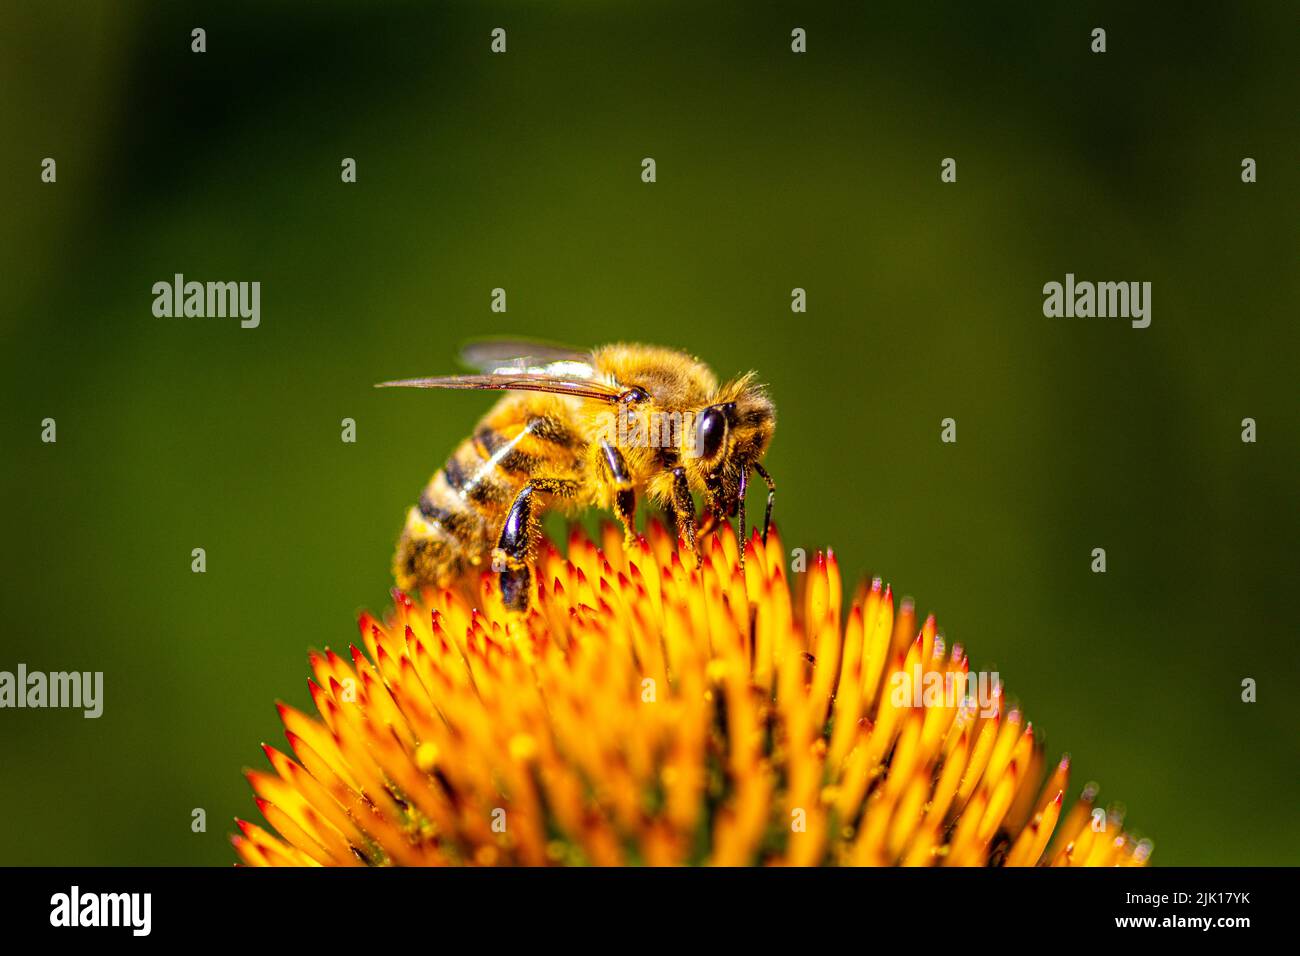 Close up shot of a honey bee covered in pollen from a flower. Stock Photo